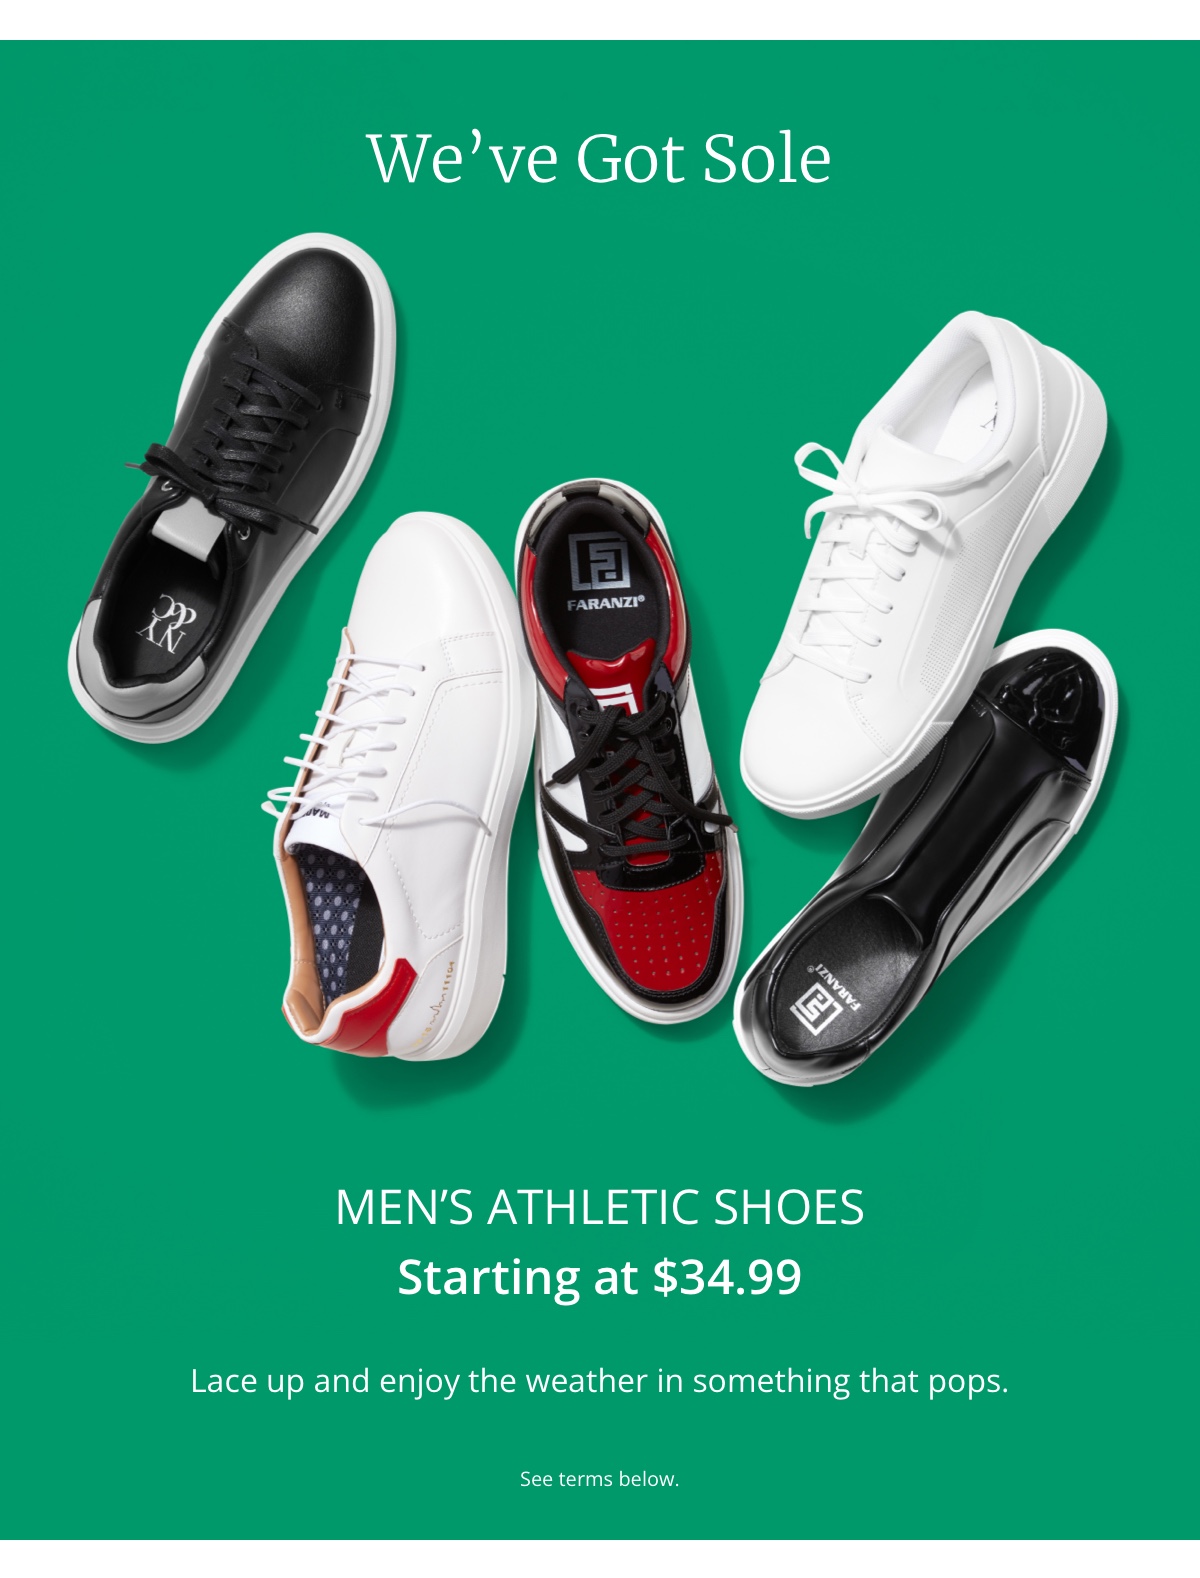 Weve Got Sole |Item of the Week|Athletic Shoes starting at $34.99|Lace up and enjoy the weather in something that pops.|See terms below.